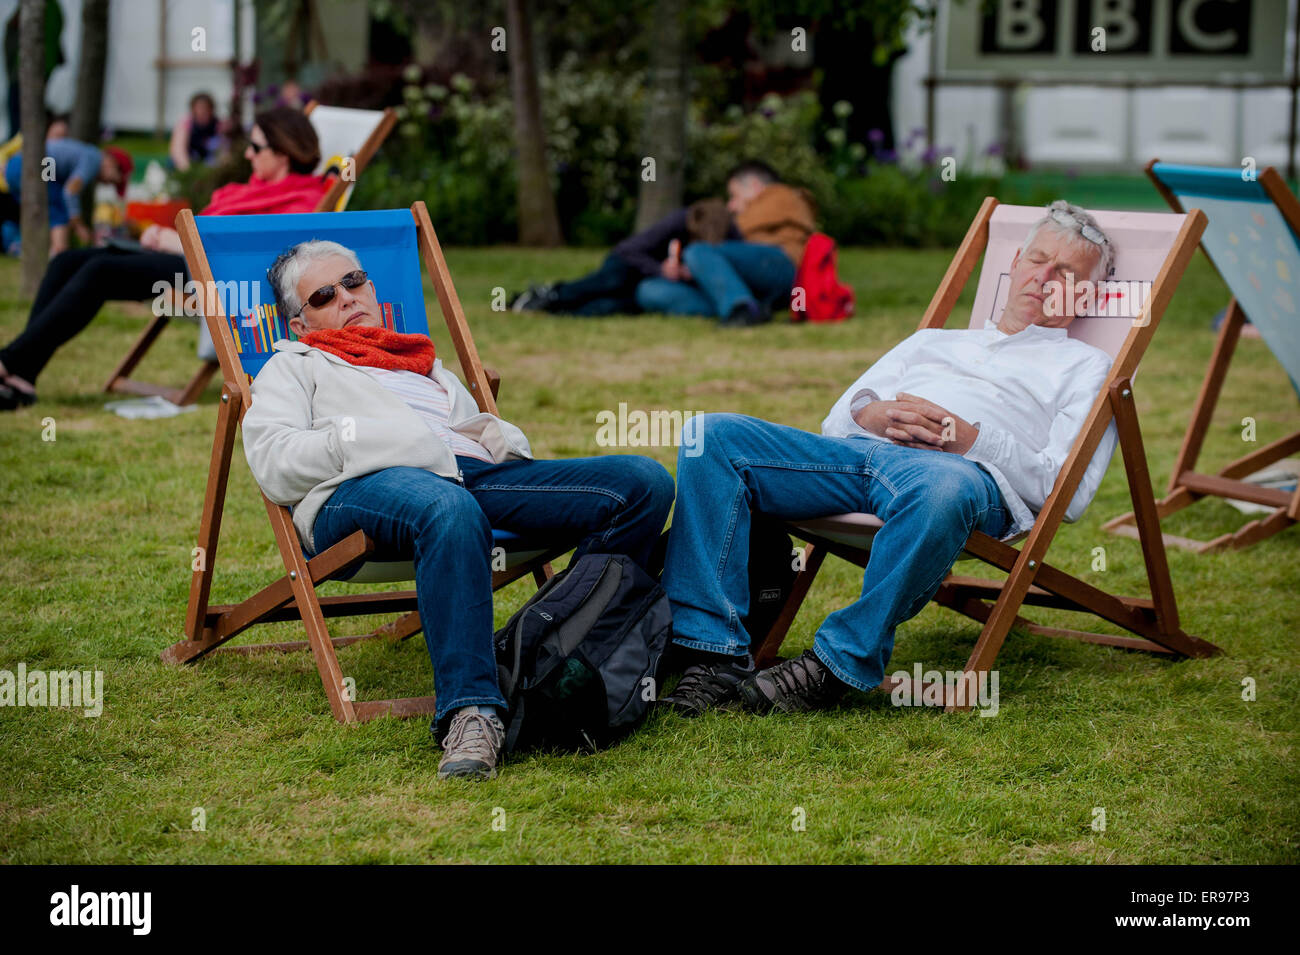 Hay on Wye, UK. Thursday 28 May 2015  Pictured: People relax in the Sun at the Hay Festival RE: The Hay Festival takes place in Hay on Wye, Powys, Wales Stock Photo